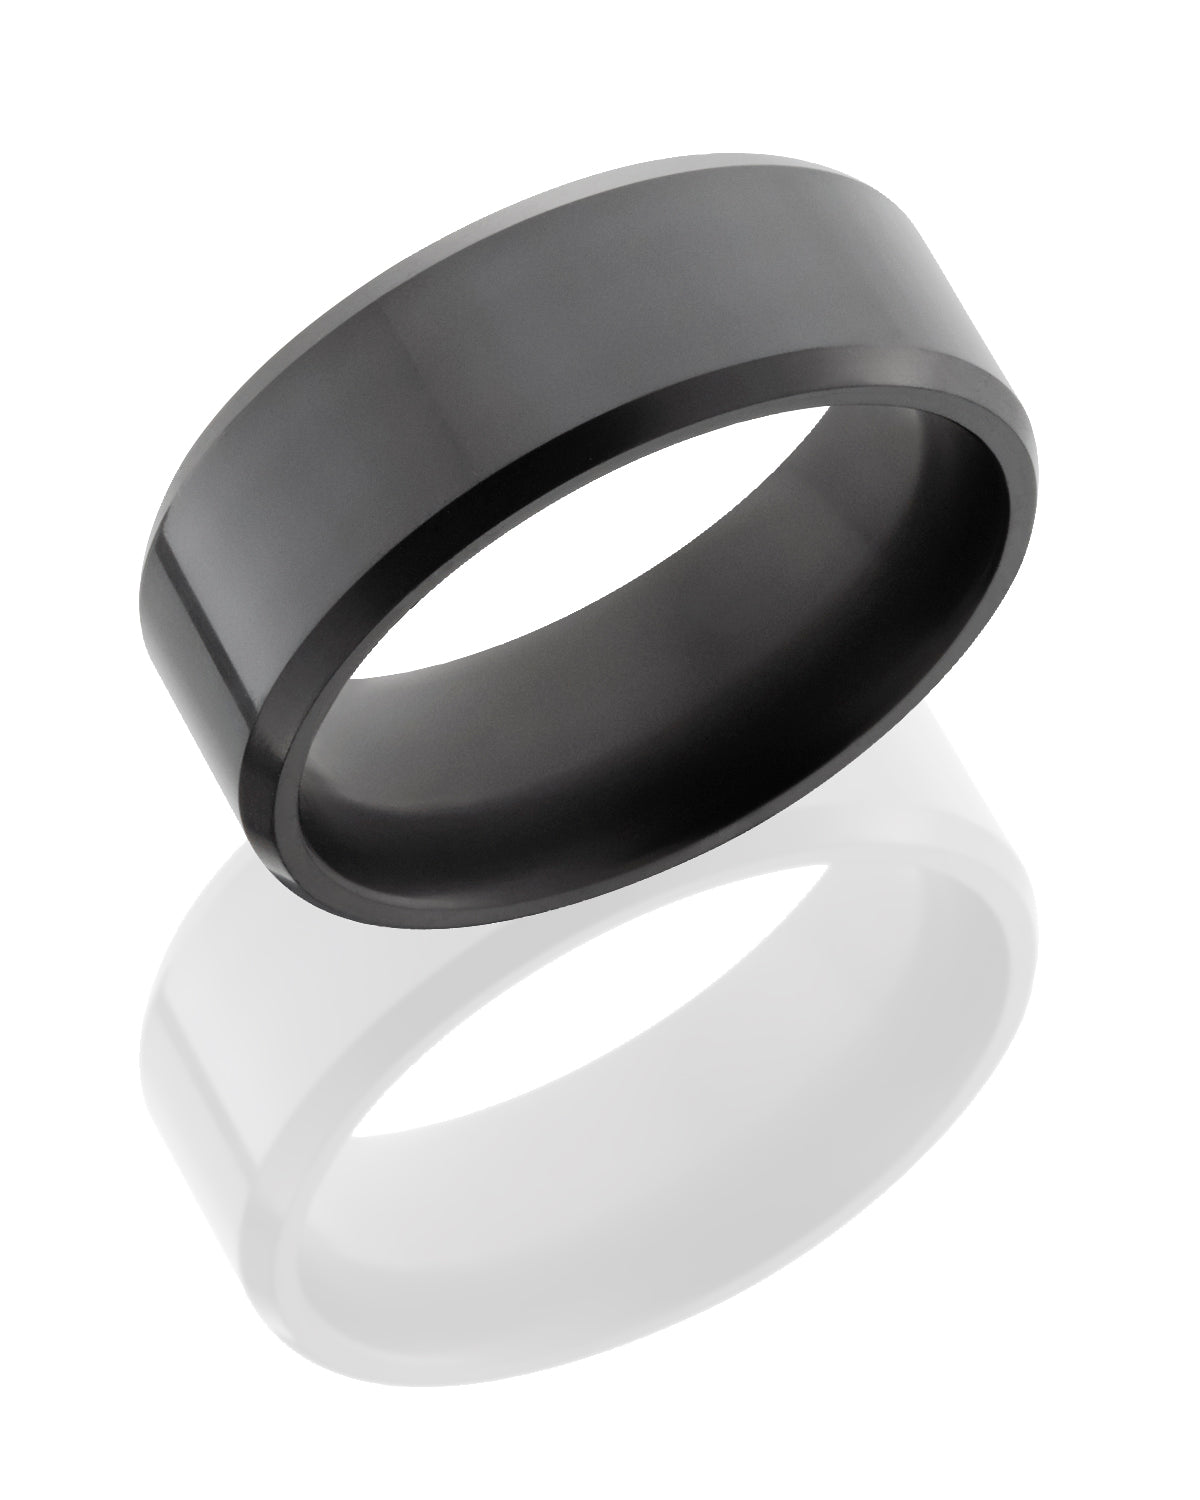 Men's Ring Made From Black Diamonds With A Matte Finish